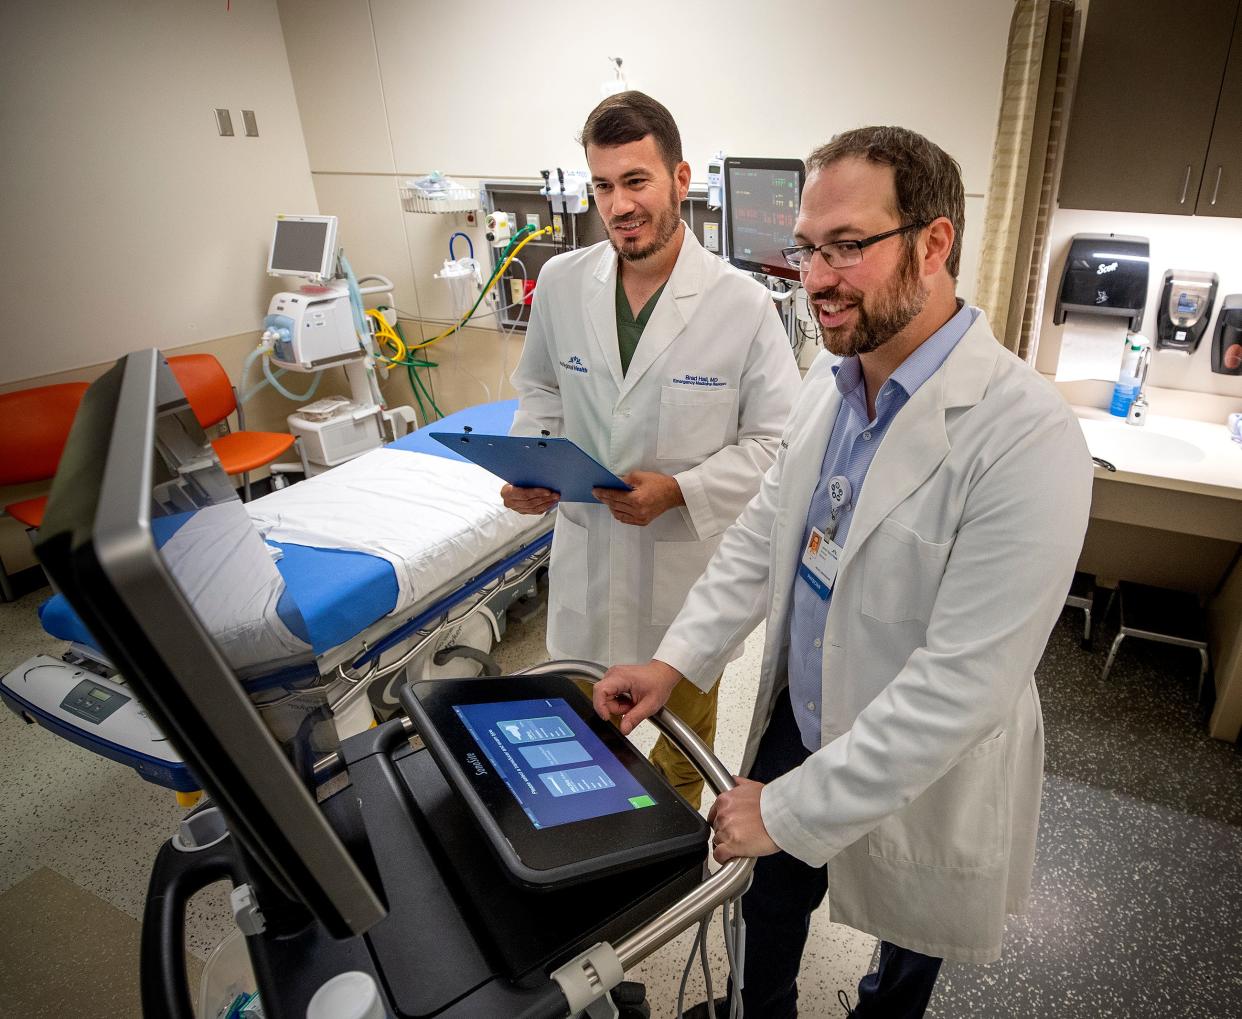 First year resident Dr. Brad Hall, left, works with Dr. Andrew Barbera, program director for the Emergency Medicine Residency Program at Lakeland Regional Health in Lakeland last week. Lakeland Regional Health is welcoming its first class of resident physicians marking its start as a teaching hospital.